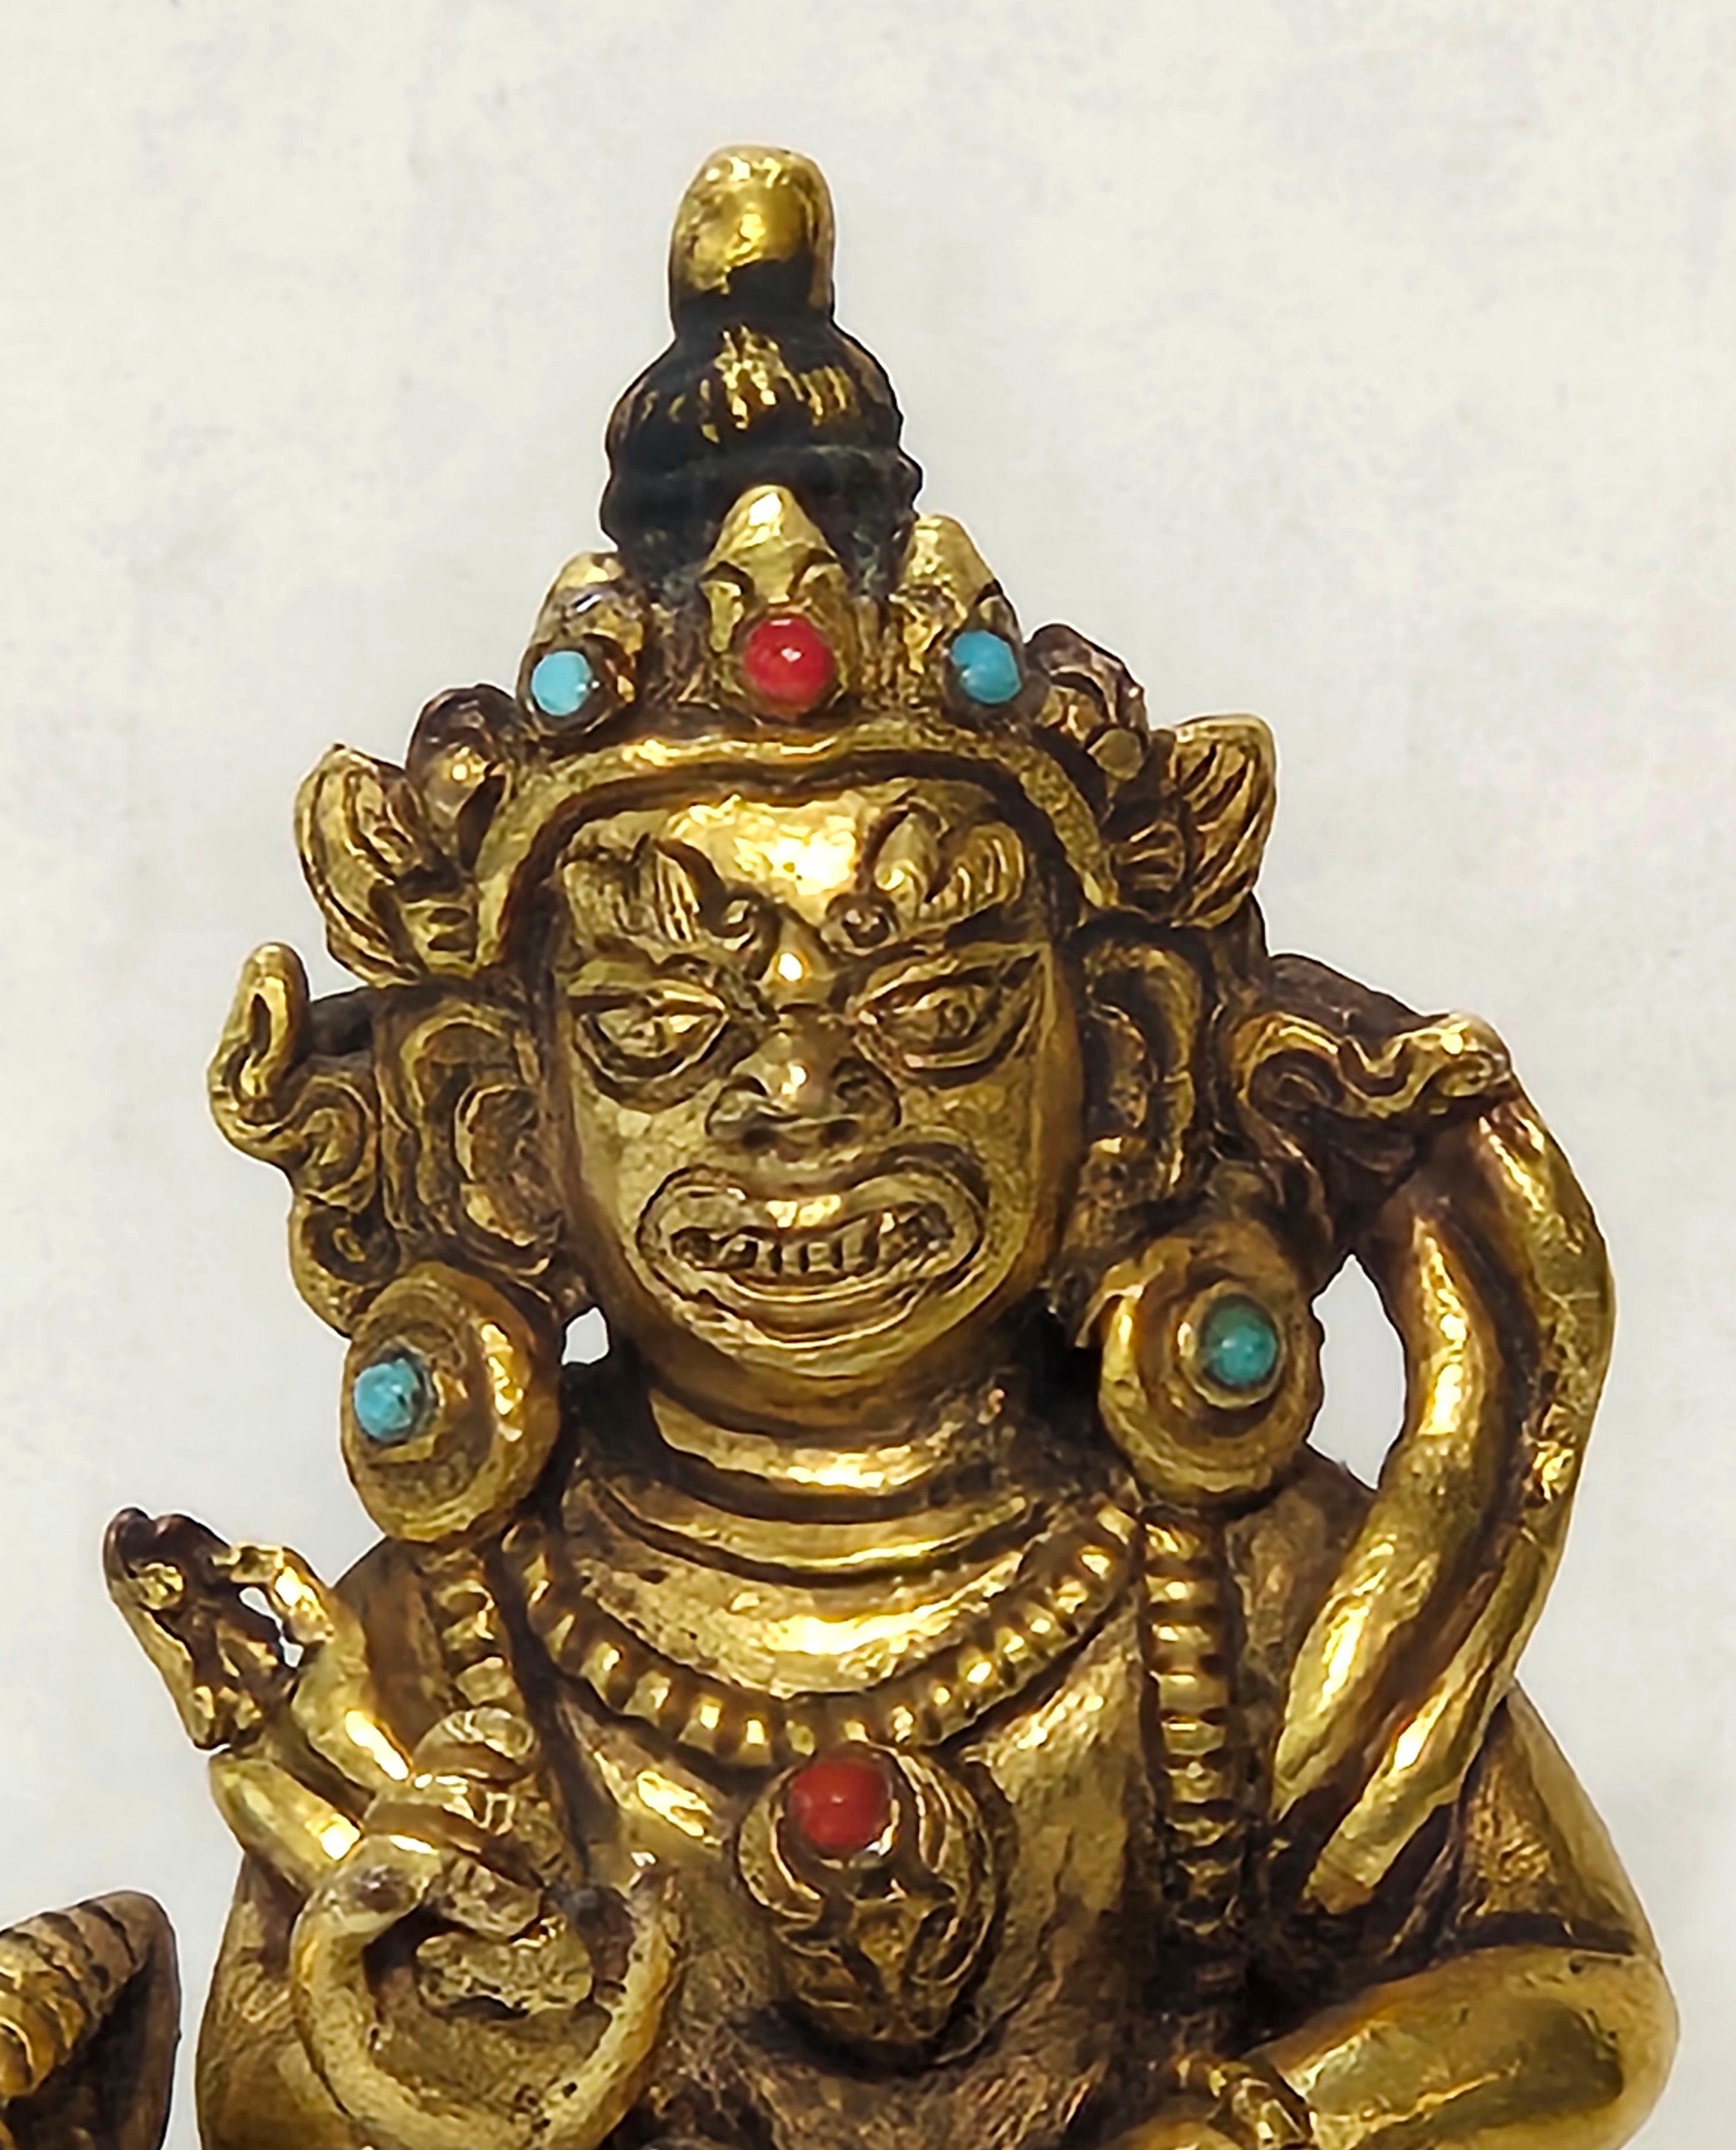 A SINO-TIBETAN GILT BRONZE FIGURE  ON HARDWOOD STAND, heavily composing a finely sculpted gilt bronze figure of a deity resting on a horse with chased detailing and turquoise and coral embellishments resting on a wood platform, 18th century. The